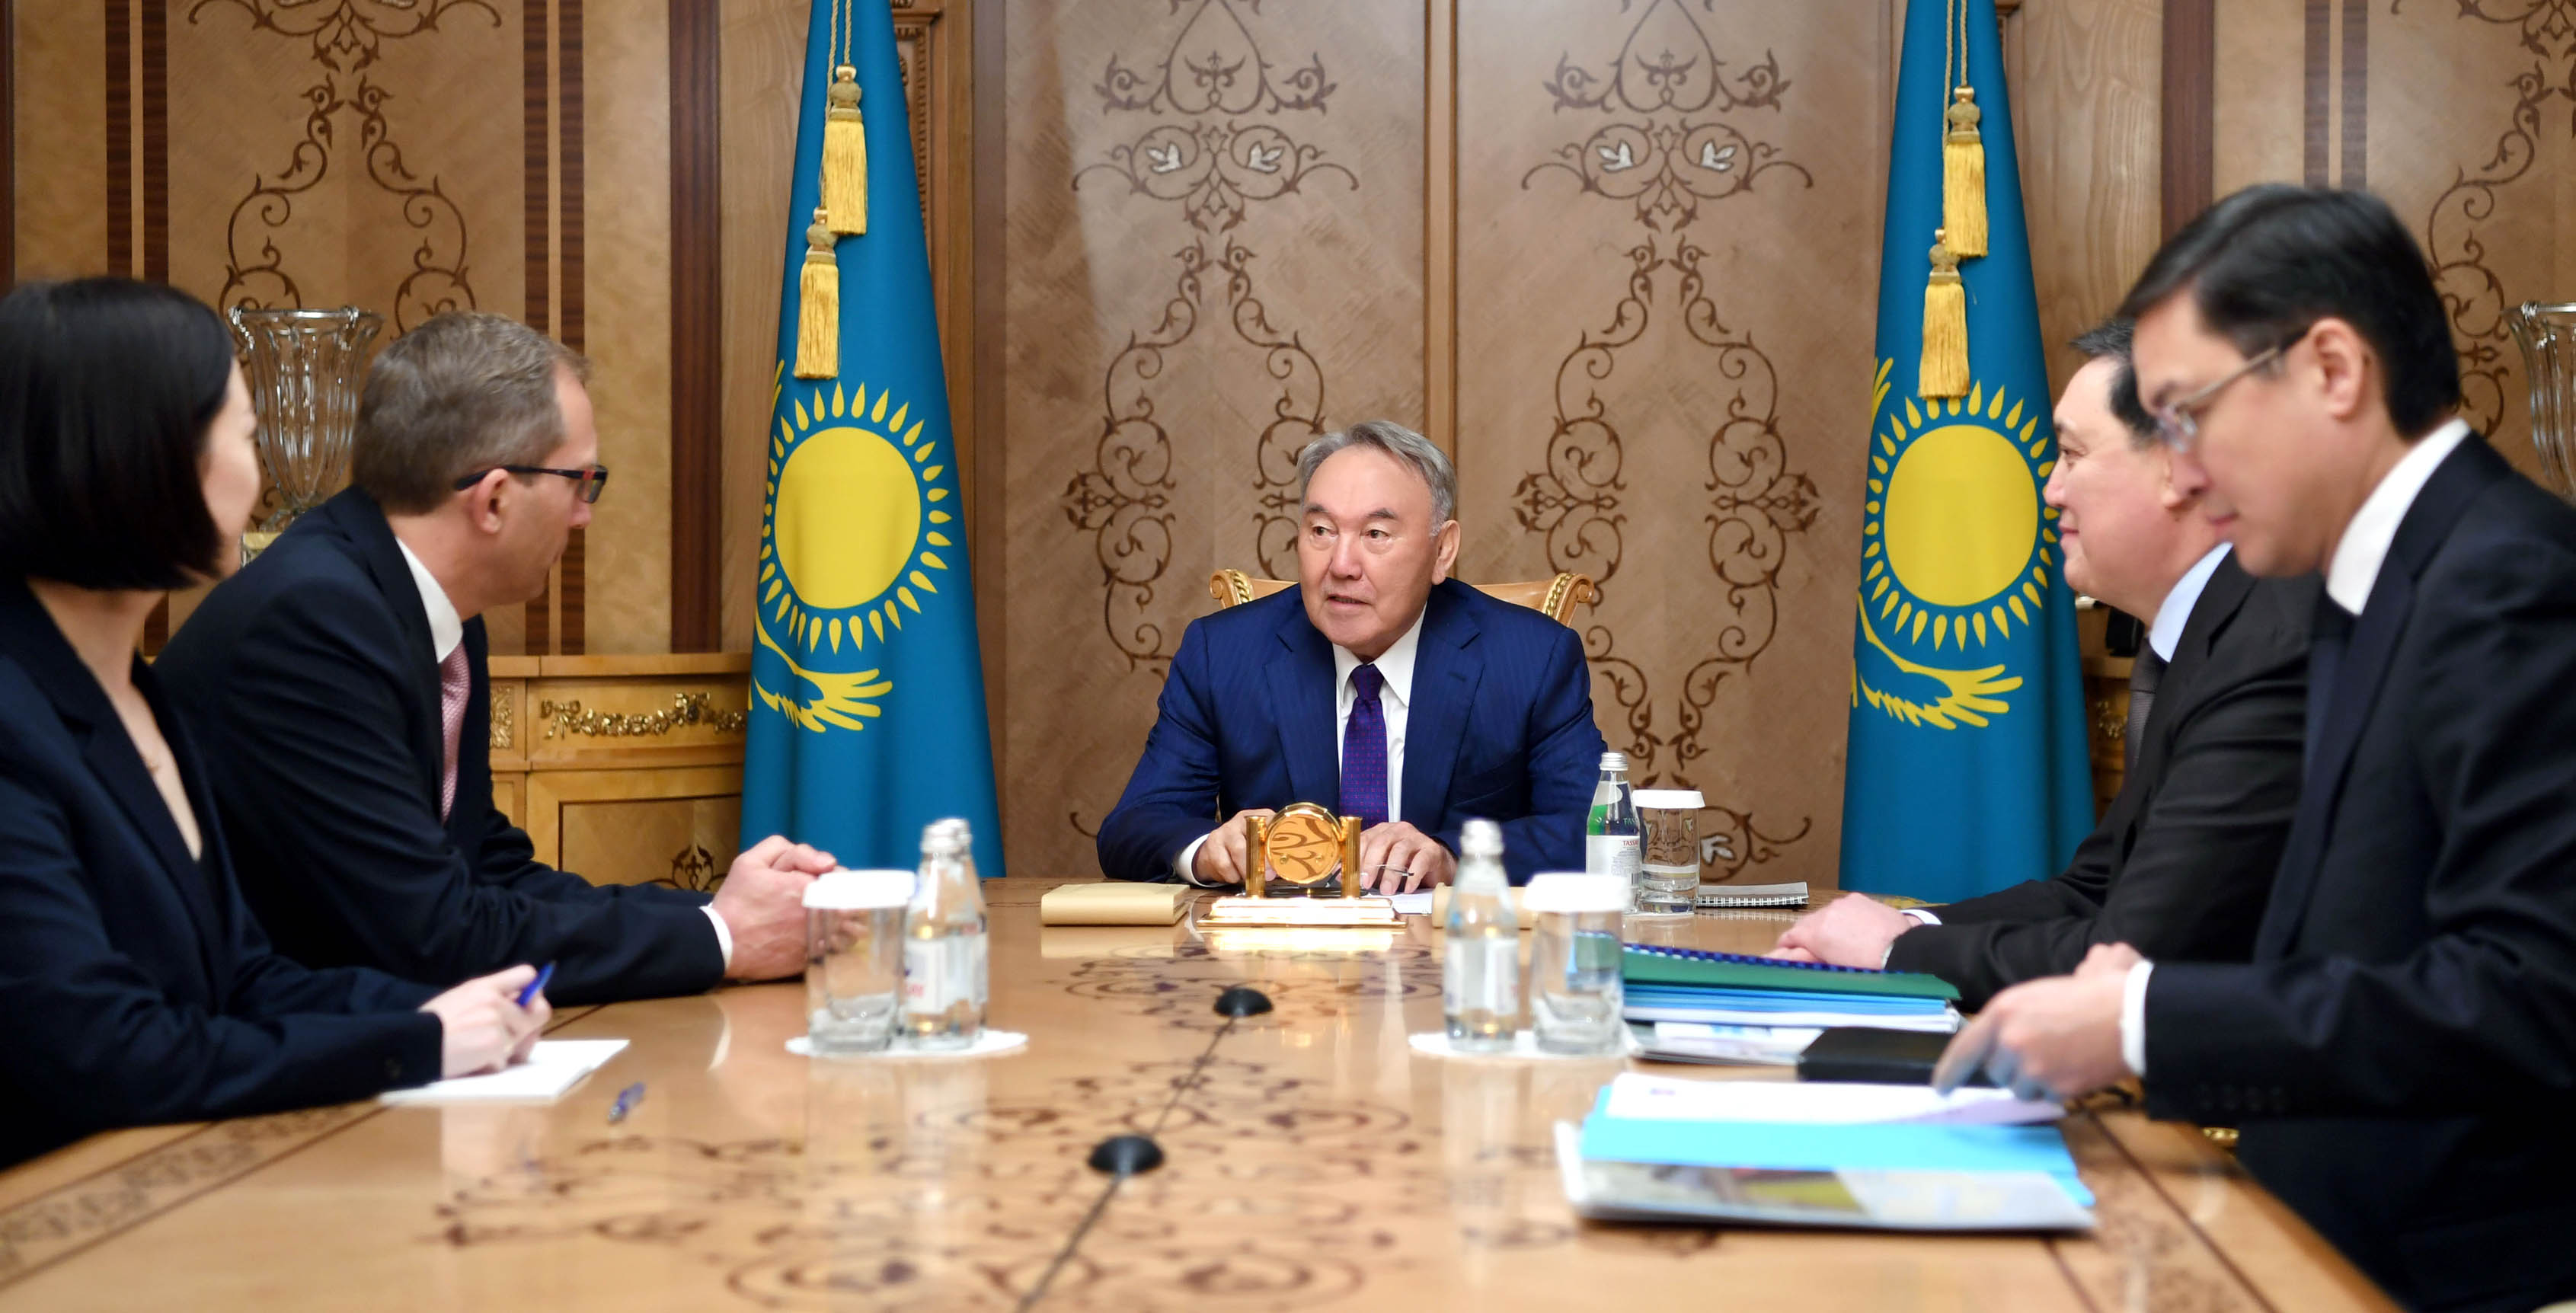 Nursultan Nazarbayev meets with the Chairman of the Board of the company ALSTOM Henri Poupart-Lafarge